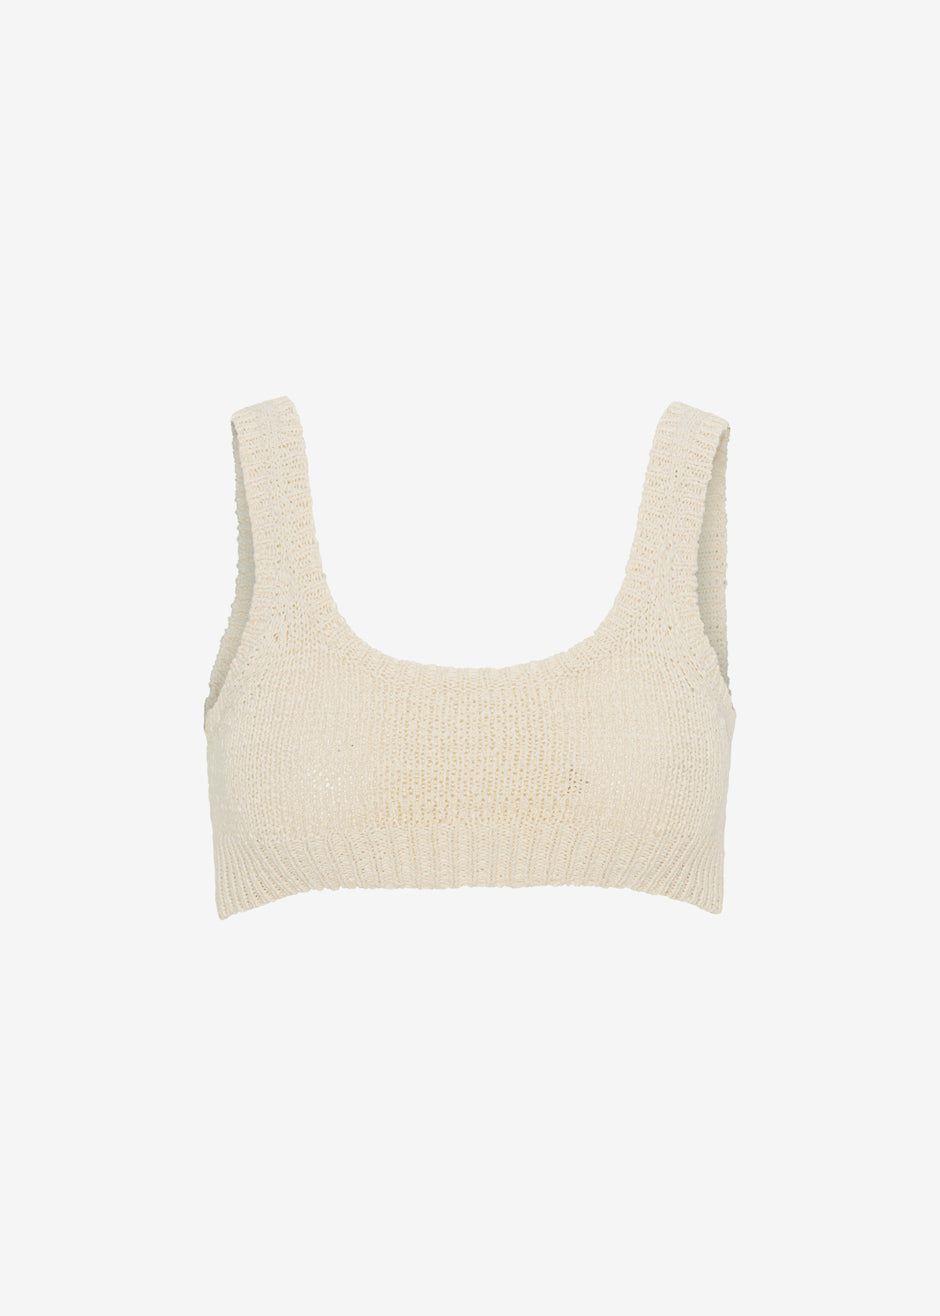 ROTATE Birdy Knit Top - White Asparagus - 6